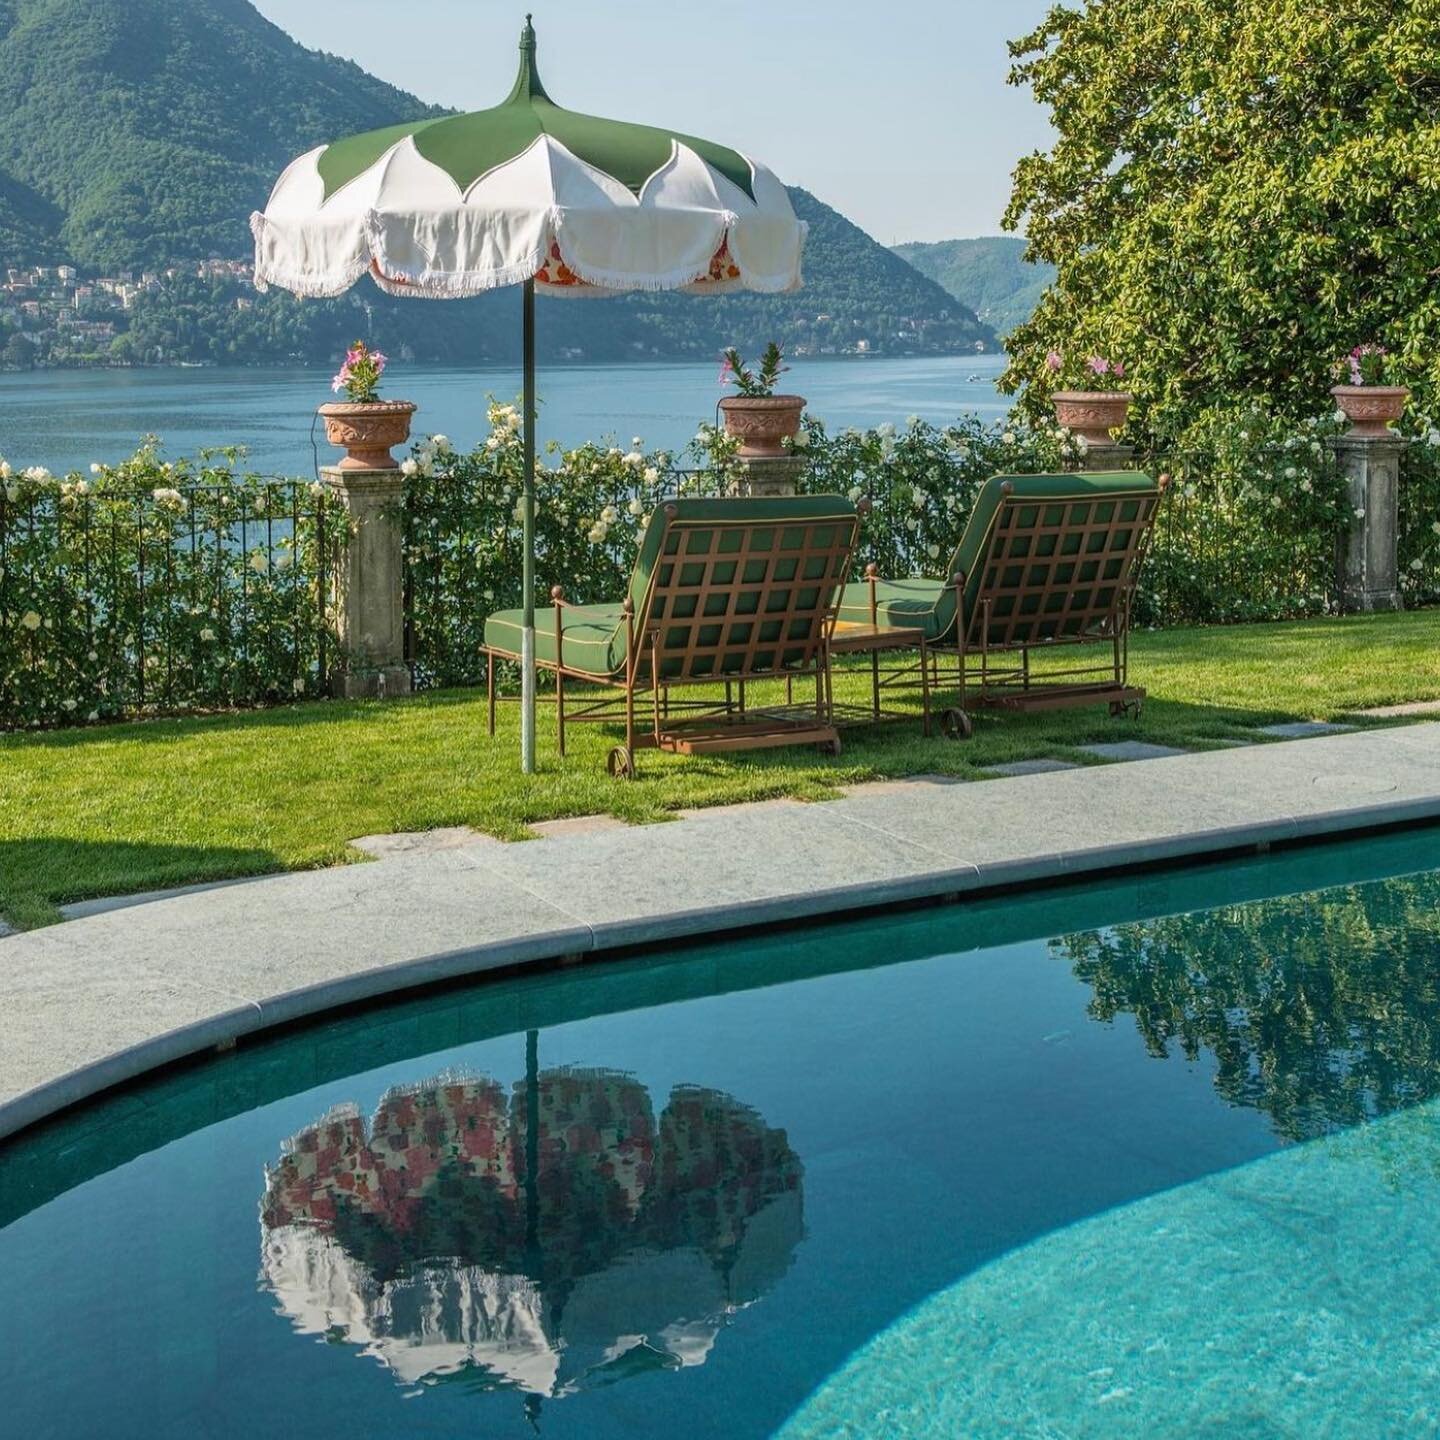 🇮🇹 the stuff that dreams are made of 🇮🇹

Ciao bella to a new lakeside wonder, opening this week on the storied shores of Lake Como. Say hello to the glorious new @passalacqualakecomo #PassalacquaLakeComo, the latest hotel haven created by the bri